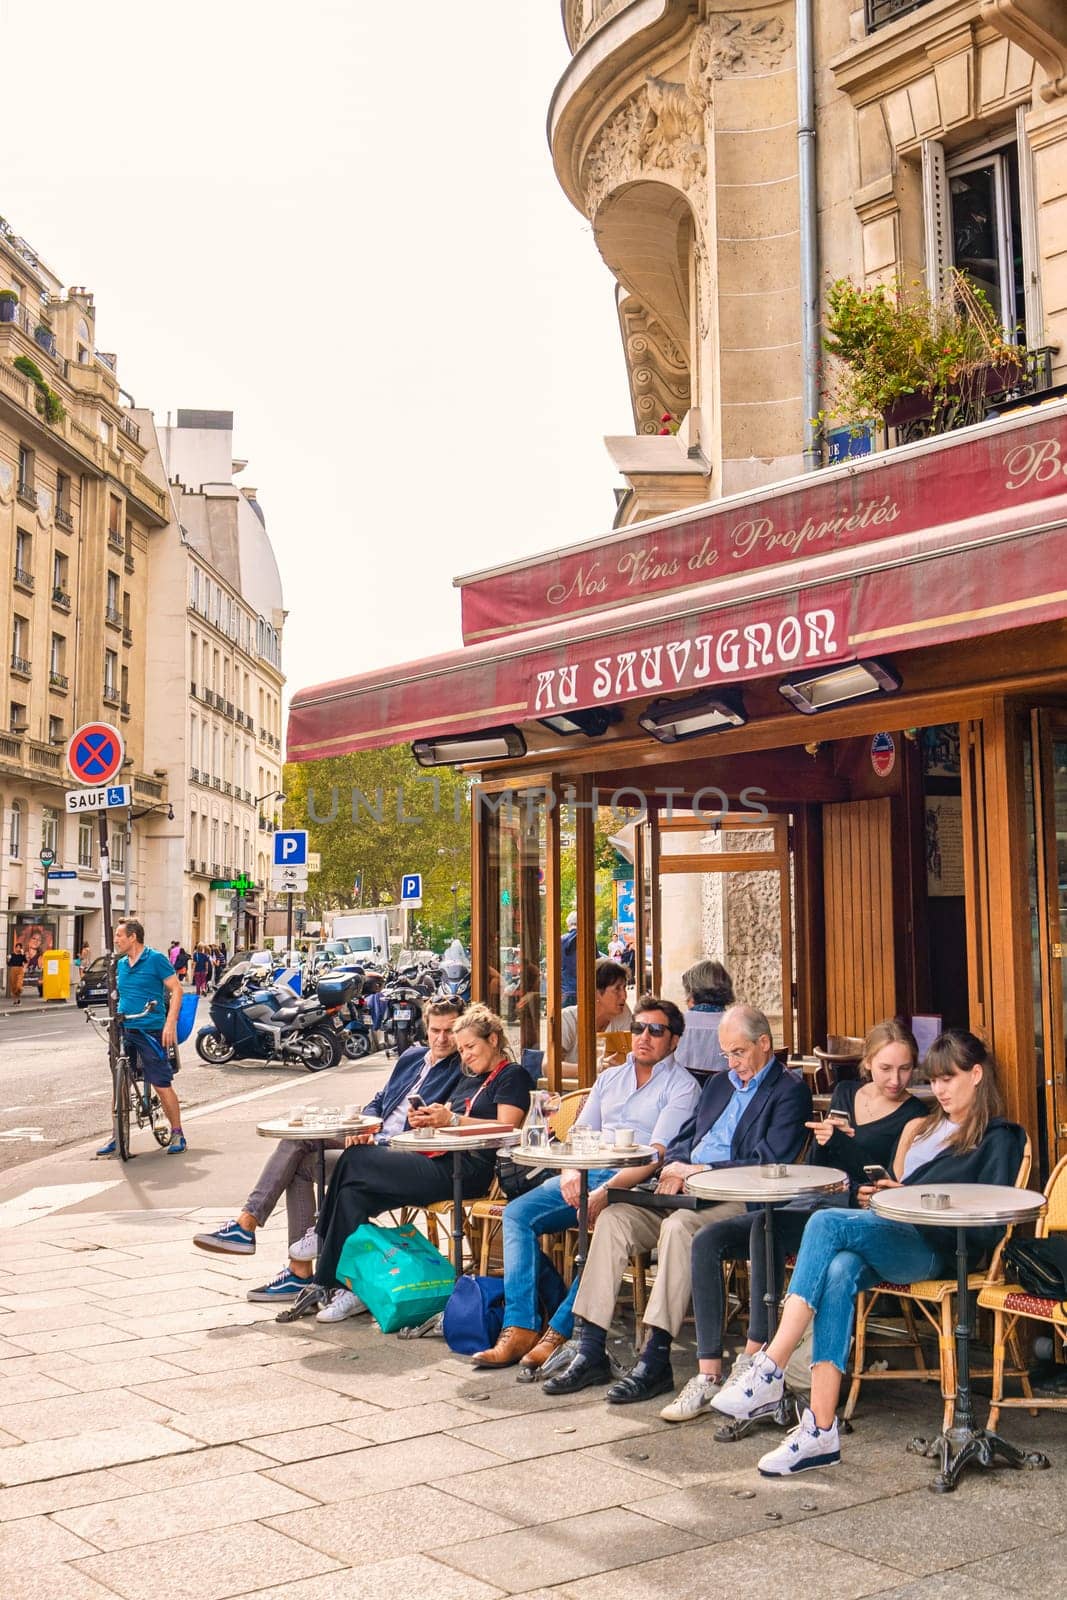 Paris France 20 September 2021, people drinking coffee on the terrace of a cafe restaurant during the Autumn end of summer.